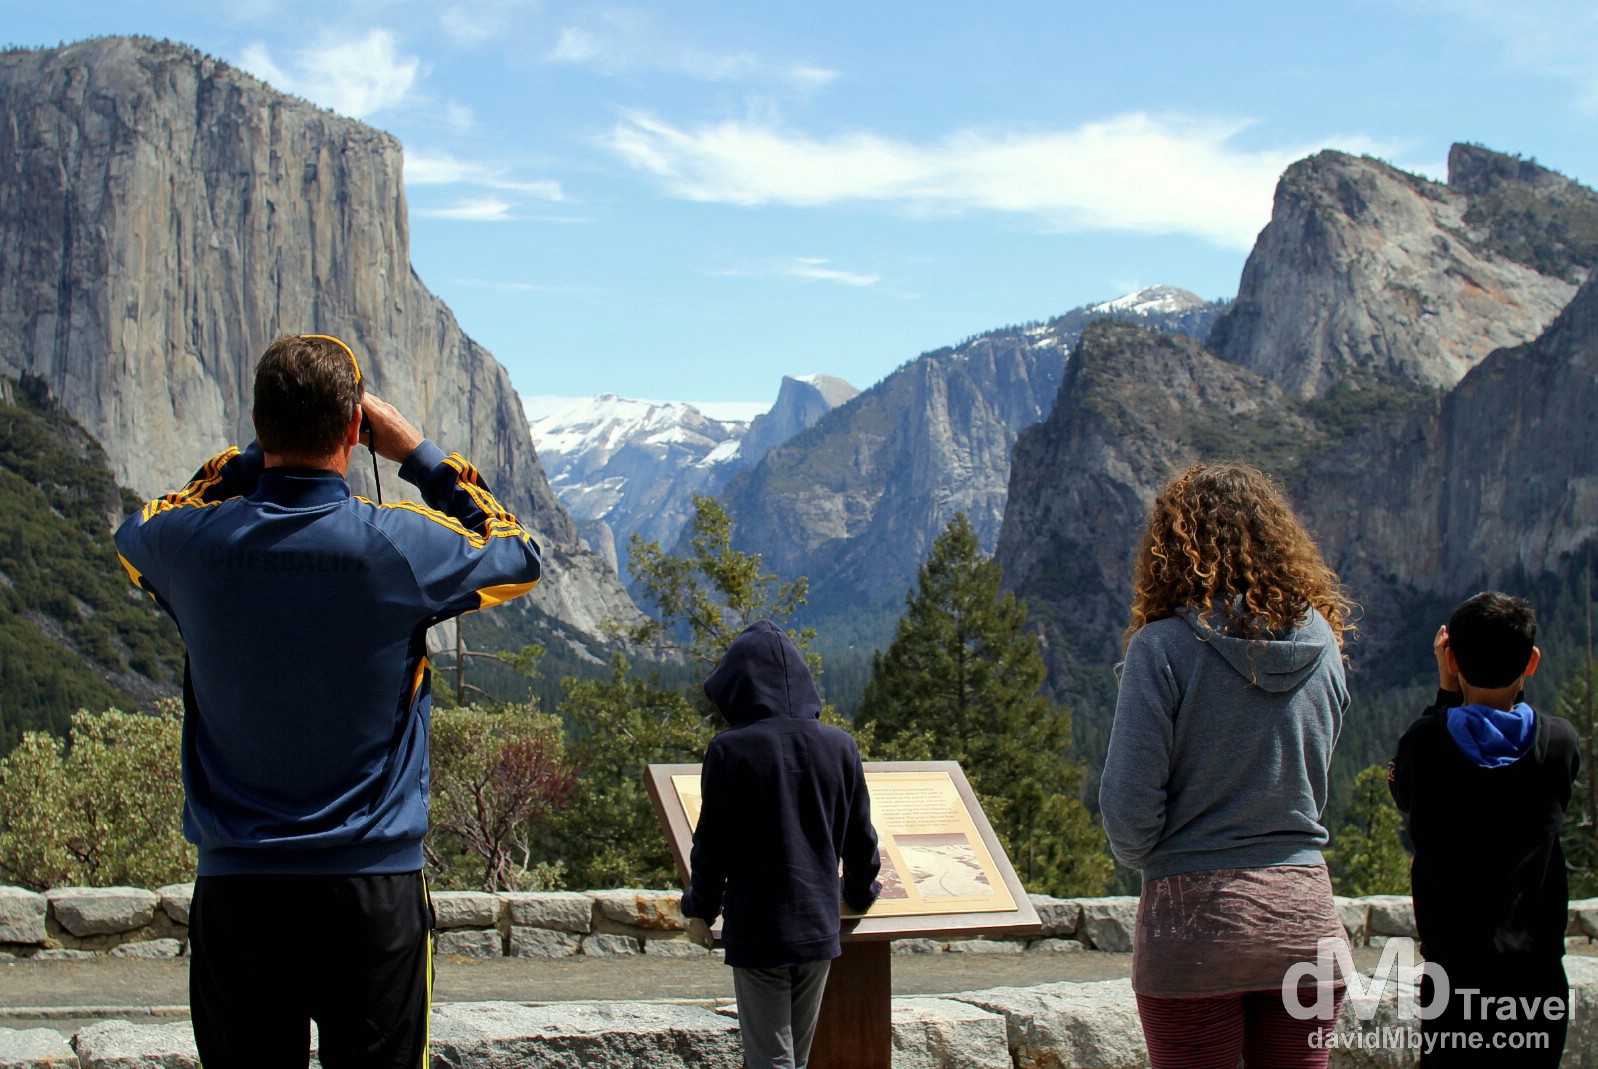 Admiring the Yosemite Valley from Tunnel View in Yosemite National Park, California, USA. April 2nd 2013.